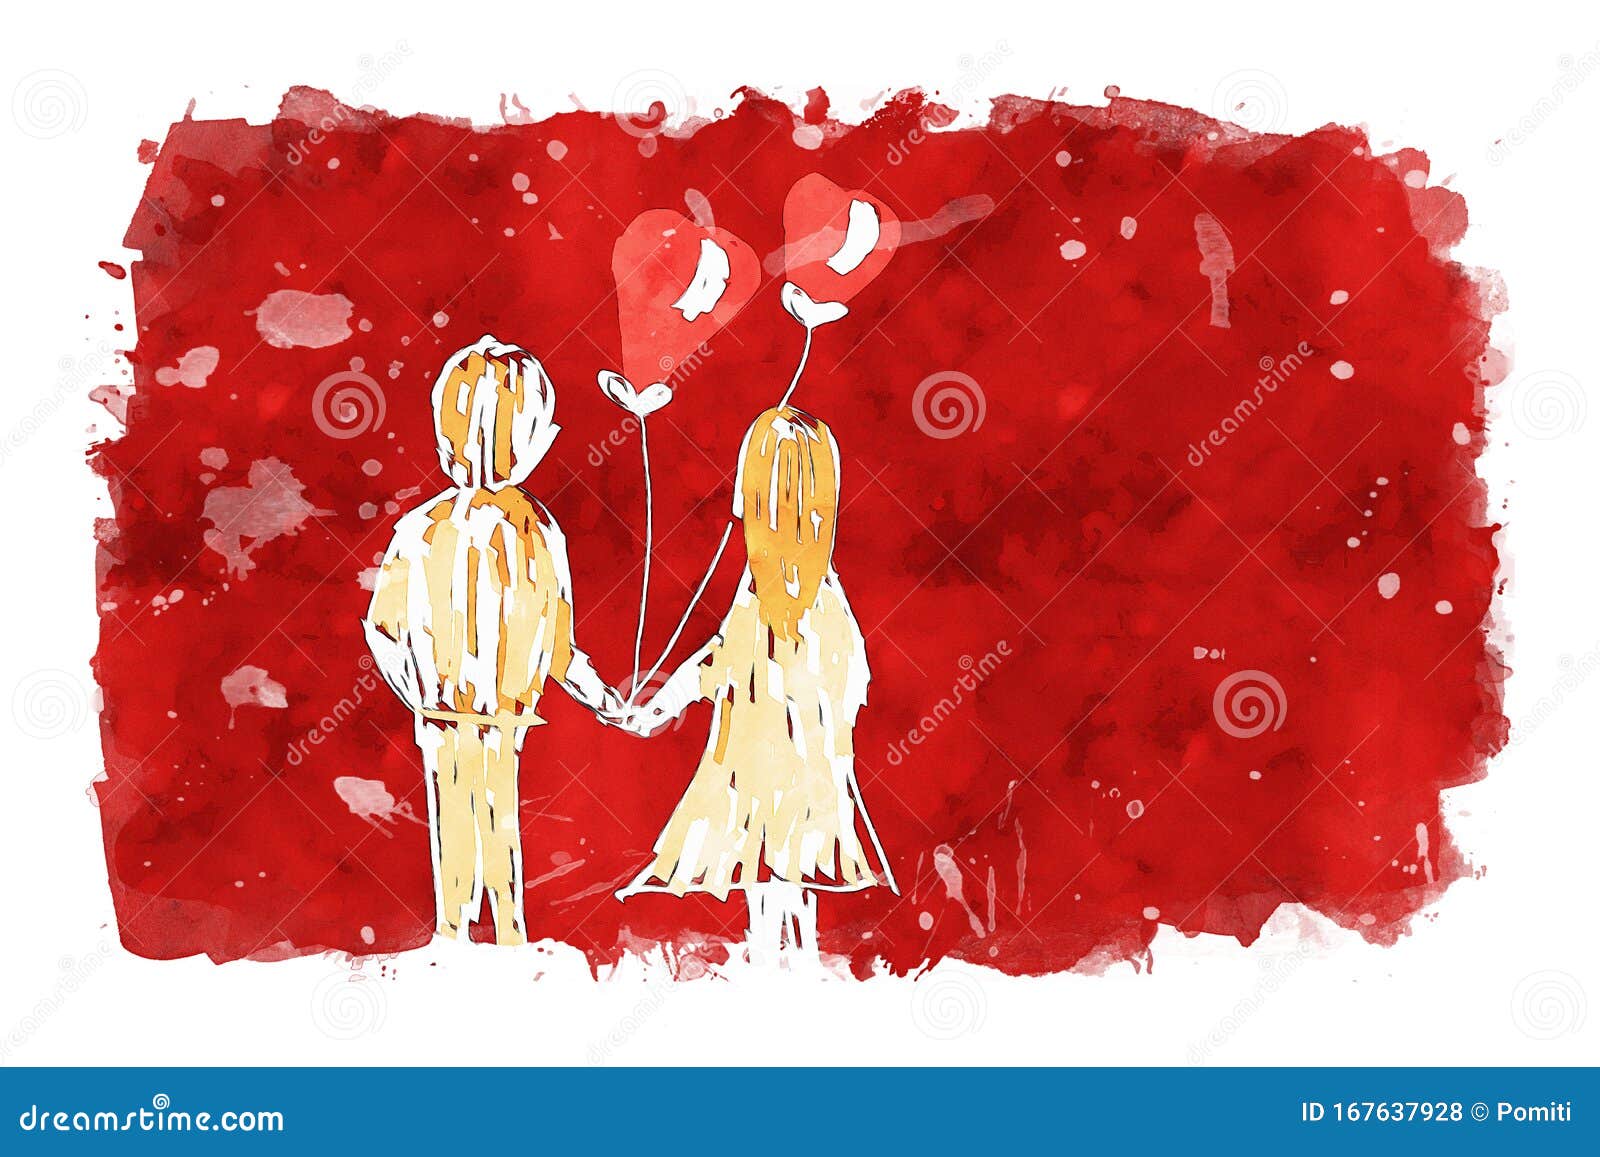 Man And Woman Holding Heart Shape Balloons On Red Watercolor Background, Valentine`s Day Card Stock Illustration - Illustration Of Valentine, Happy: 167637928